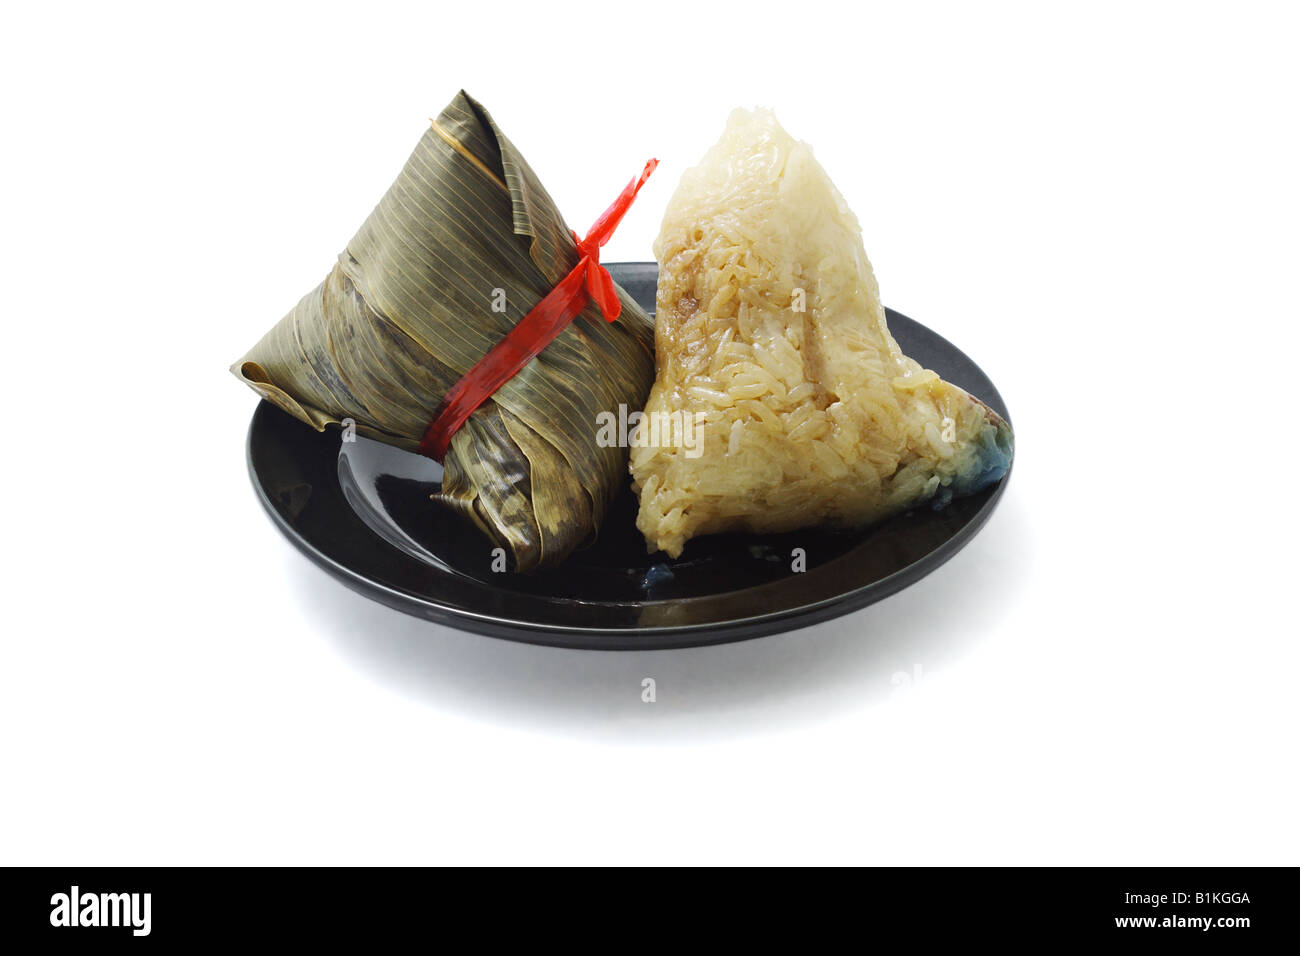 Wrapped and unwrapped Chinese rice dumplings on plate Stock Photo